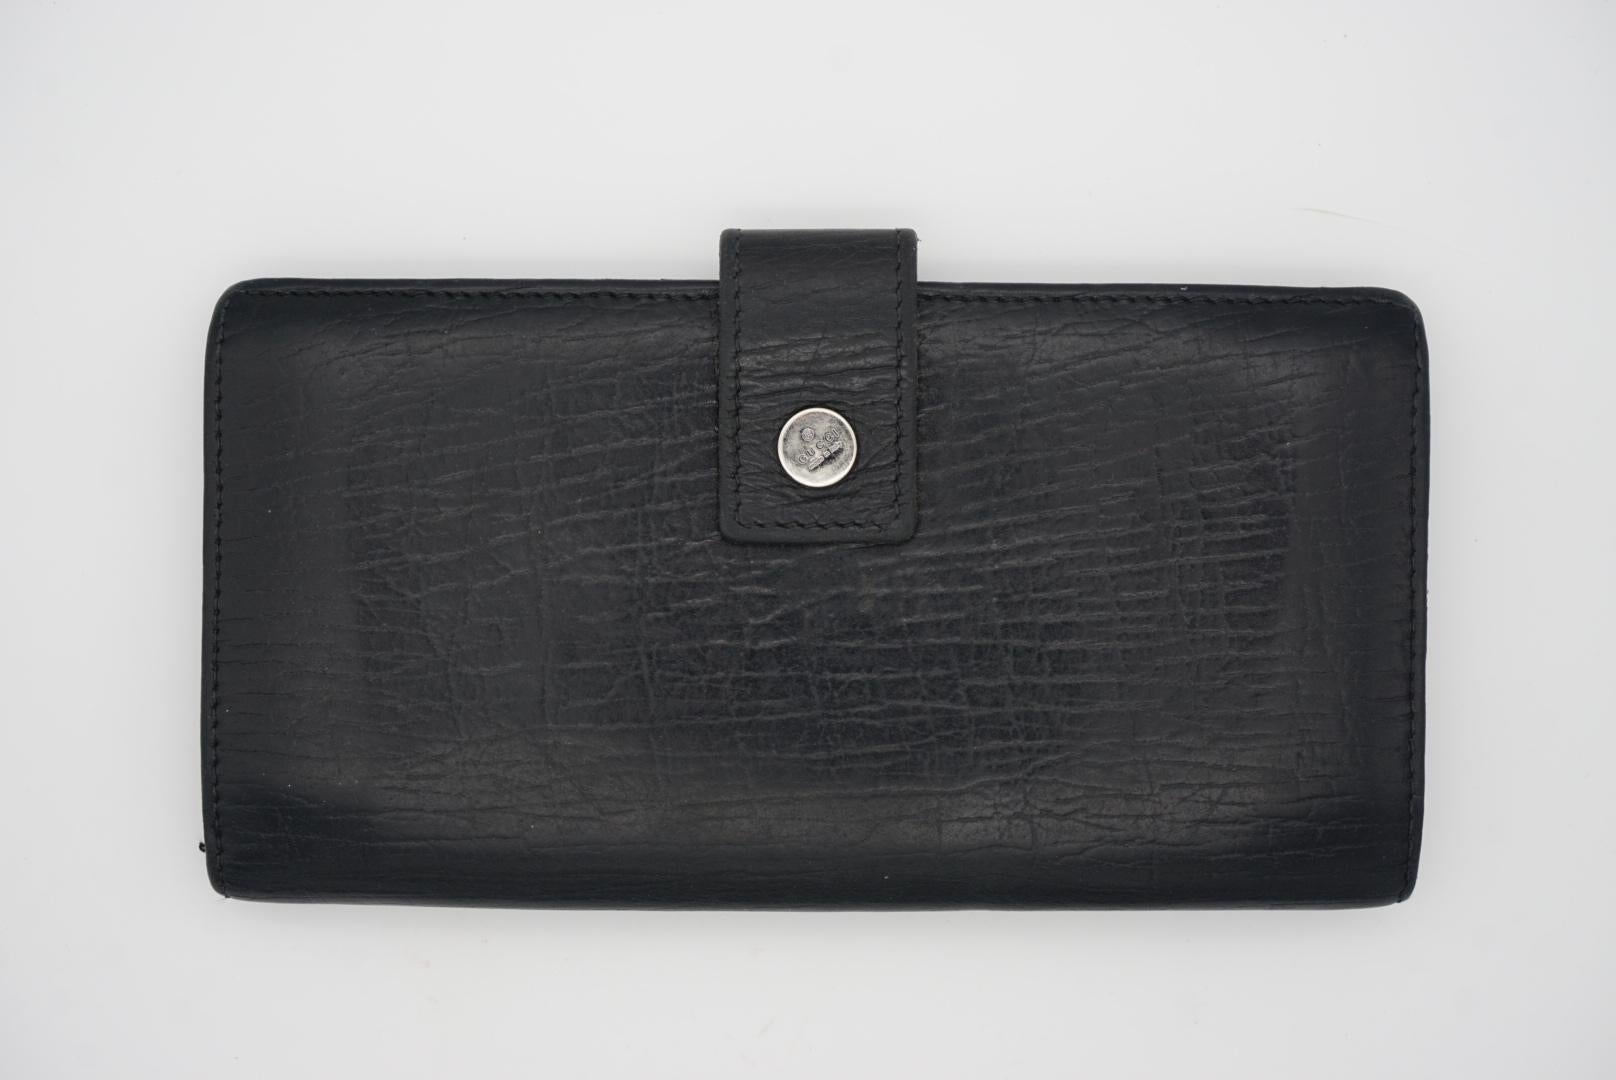 GUCCI Classic Long Black Leather Continental Wallet Purse Cash Card Hand Bag In Excellent Condition For Sale In Wokingham, England